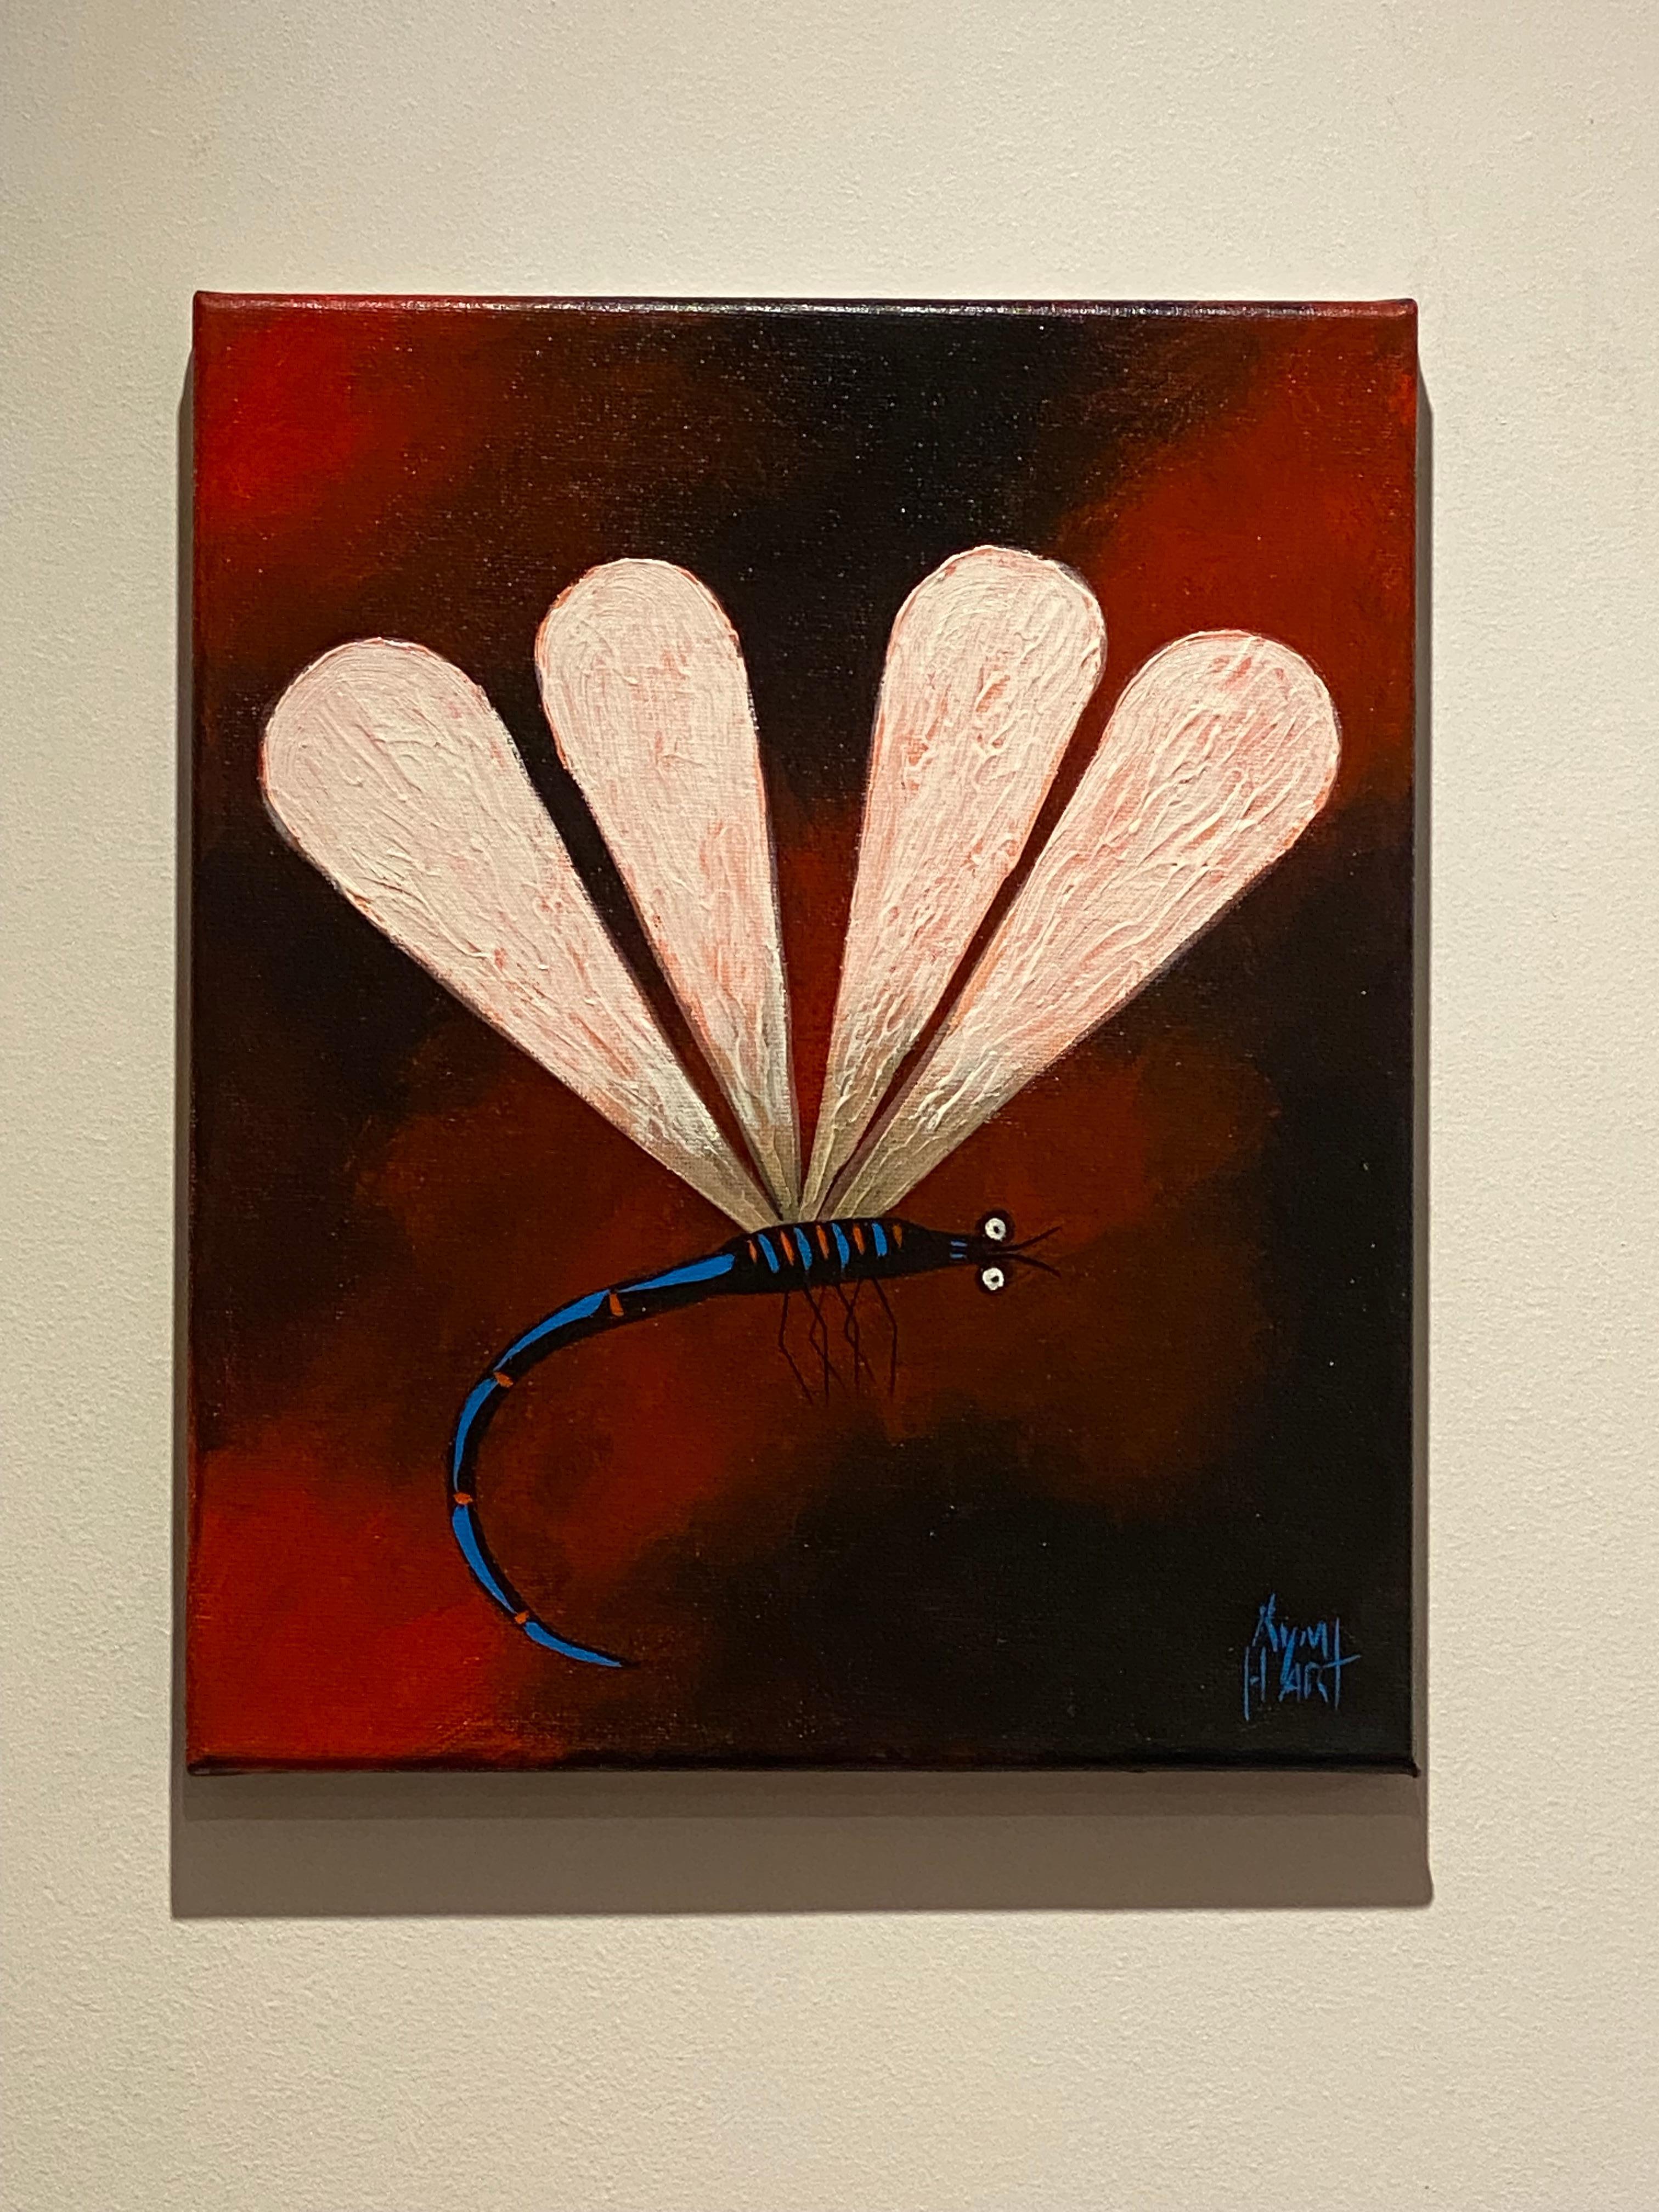 Kym Hart (1963 - ) Dragonfly (Red, Blue, Pink) Oil on Canvas Painting 25 x 20cm. In Excellent Condition For Sale In MELBOURNE, AU